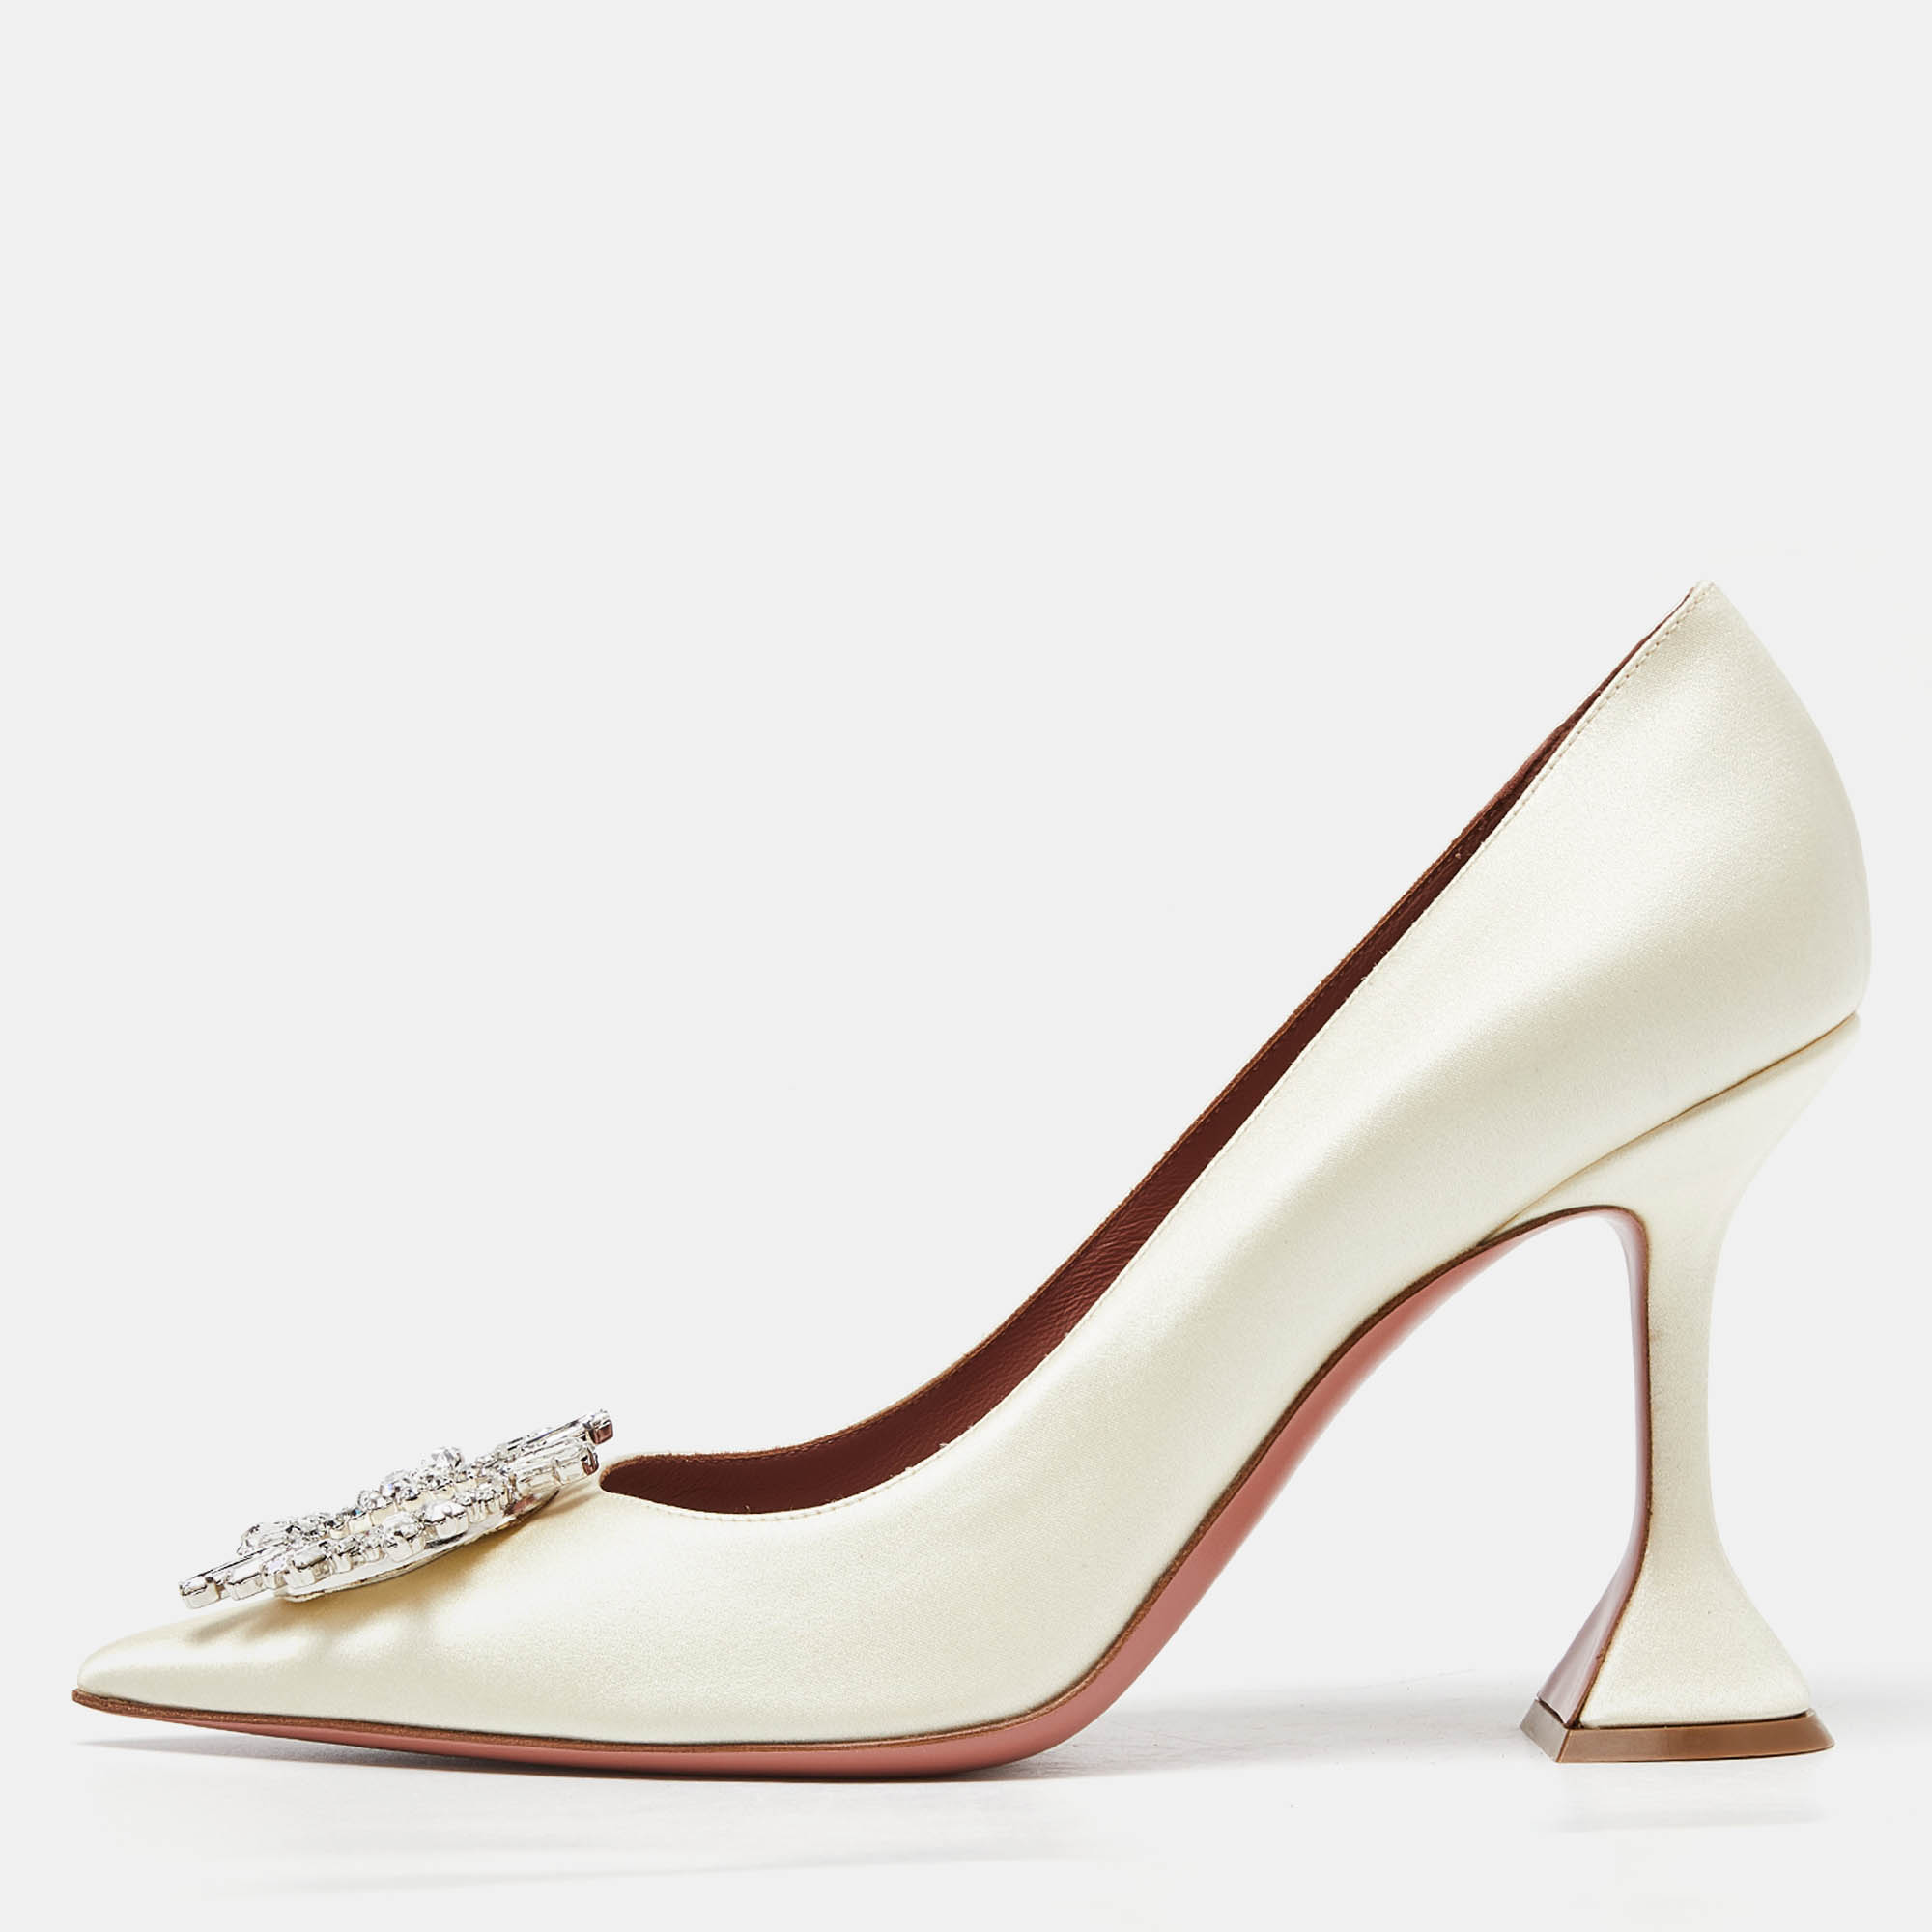 Pre-owned Amina Muaddi White Satin Begum Crystal Embellished Pointed Toe Pumps Size 39